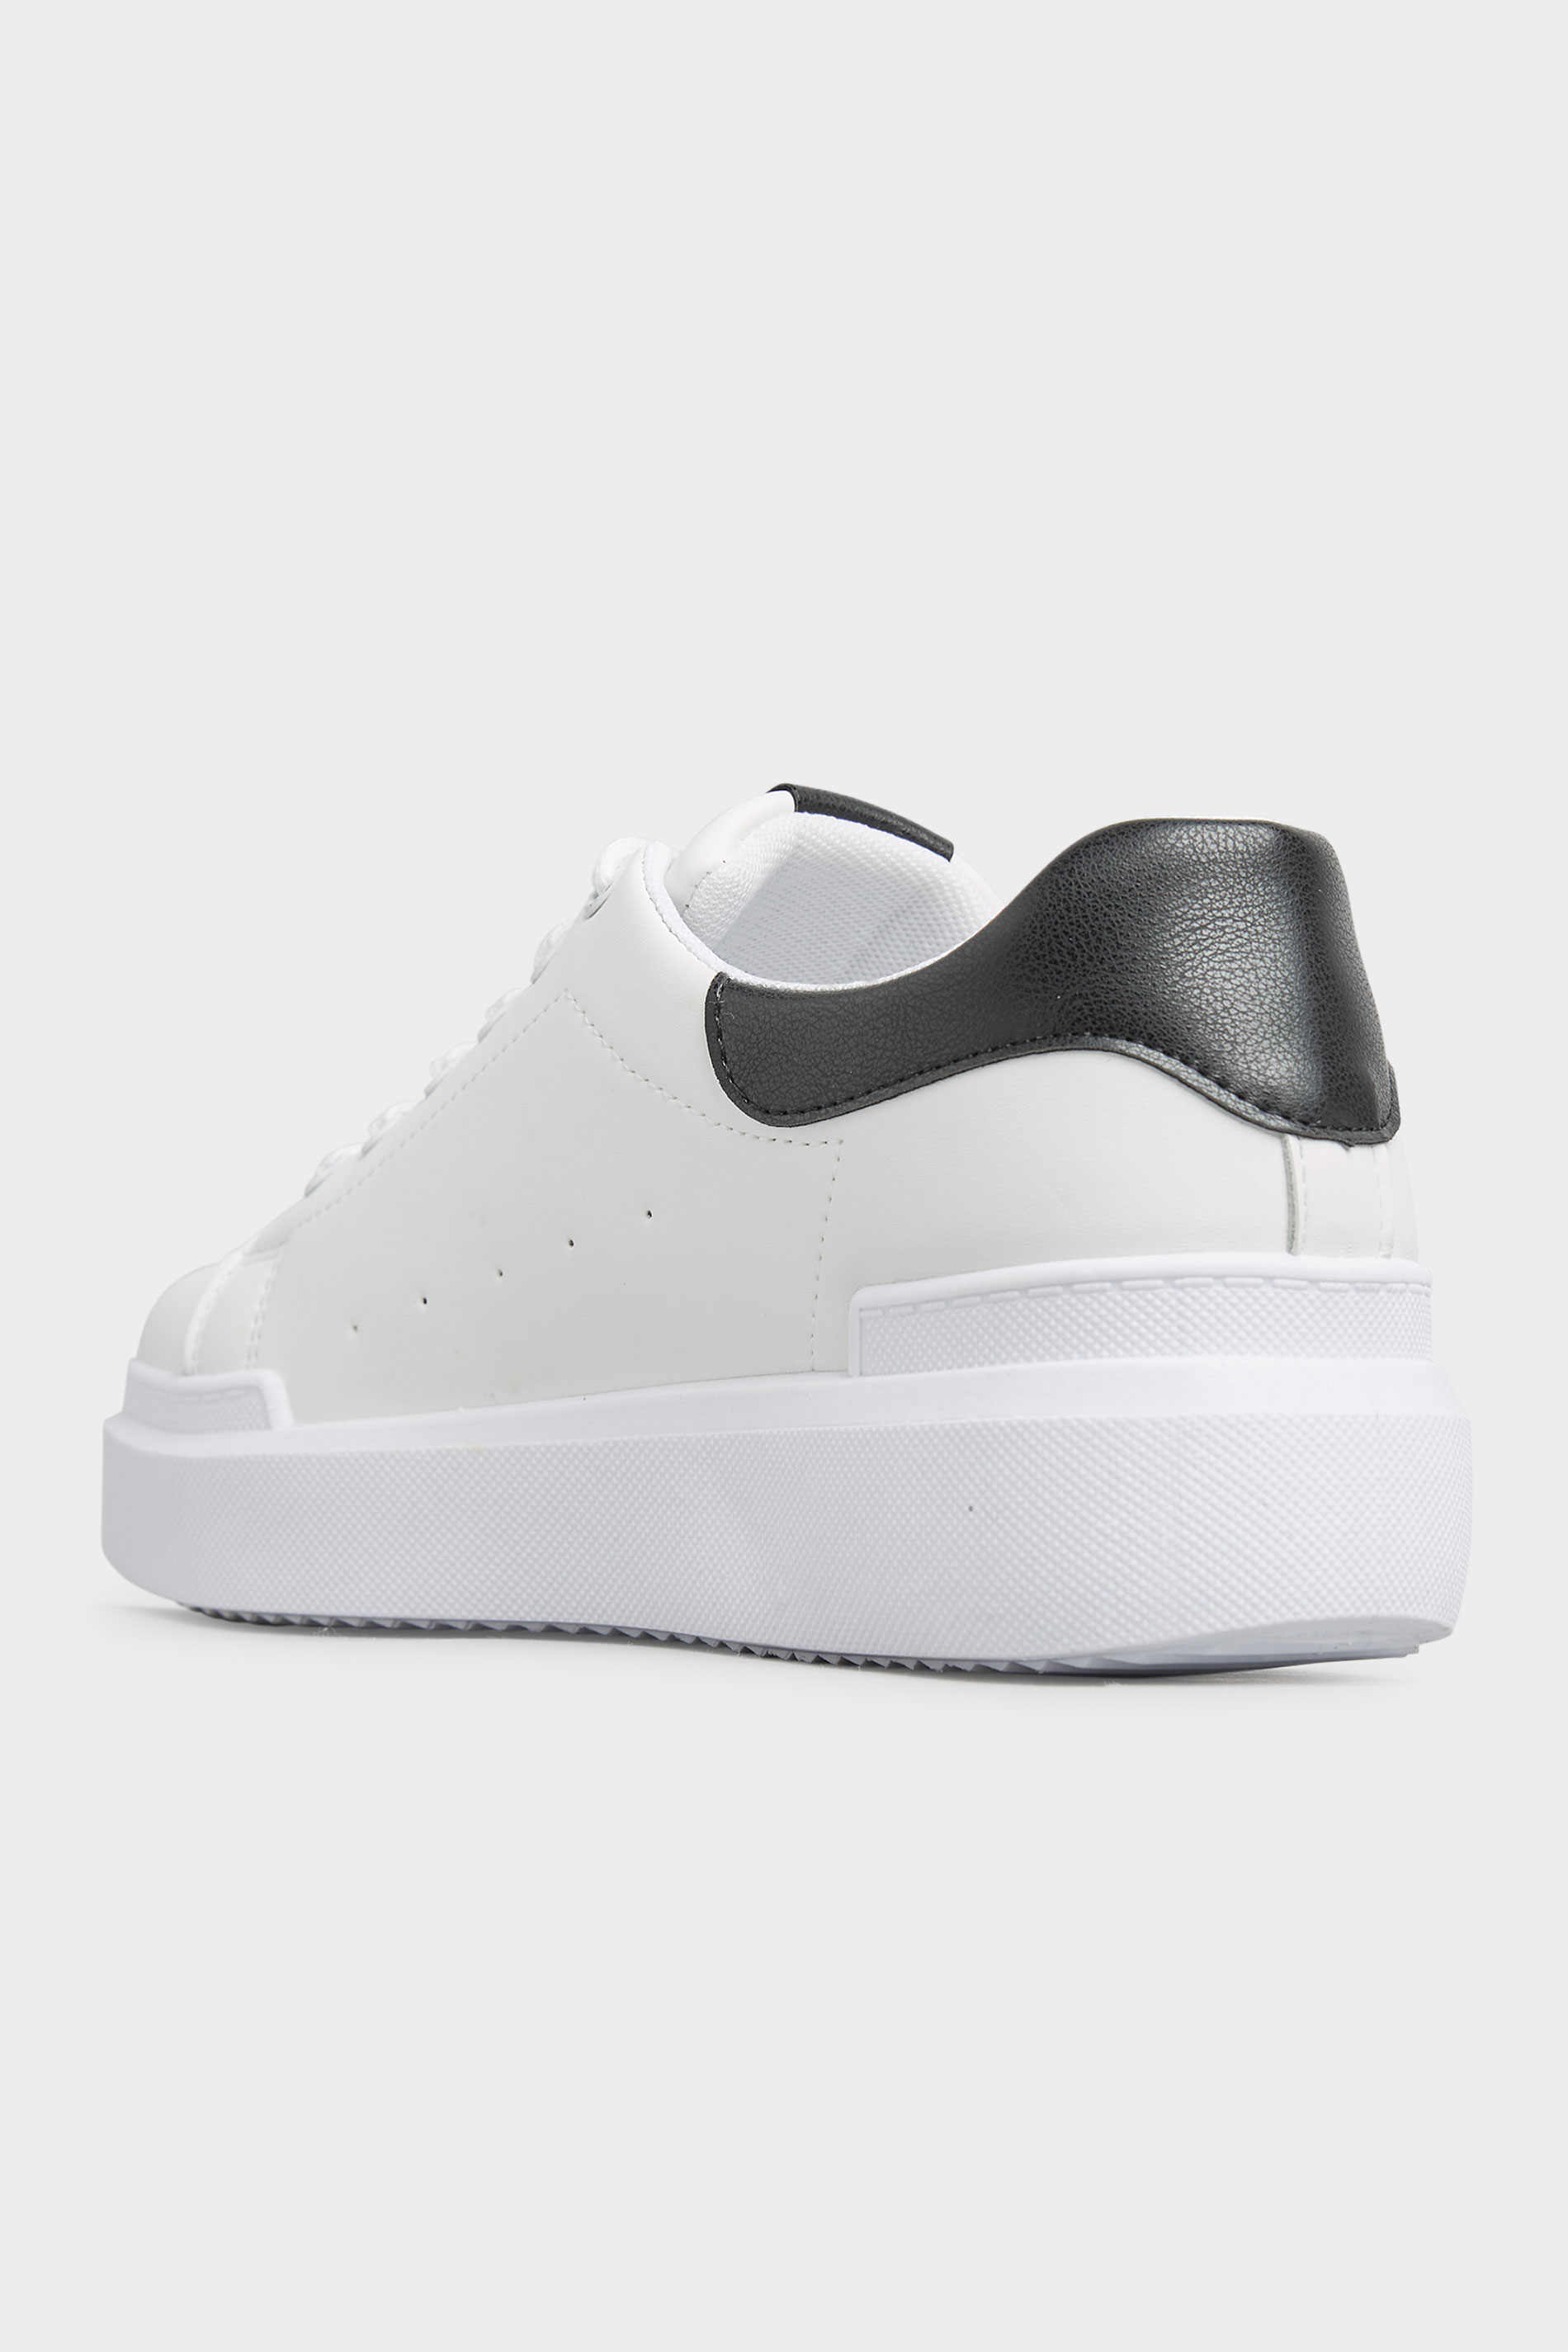 Chaussures Pieds Larges Tennis & Baskets (Regular Fit & Pieds Larges) | LIMITED COLLECTION - Tennis Blanches & Noires - IQ09007